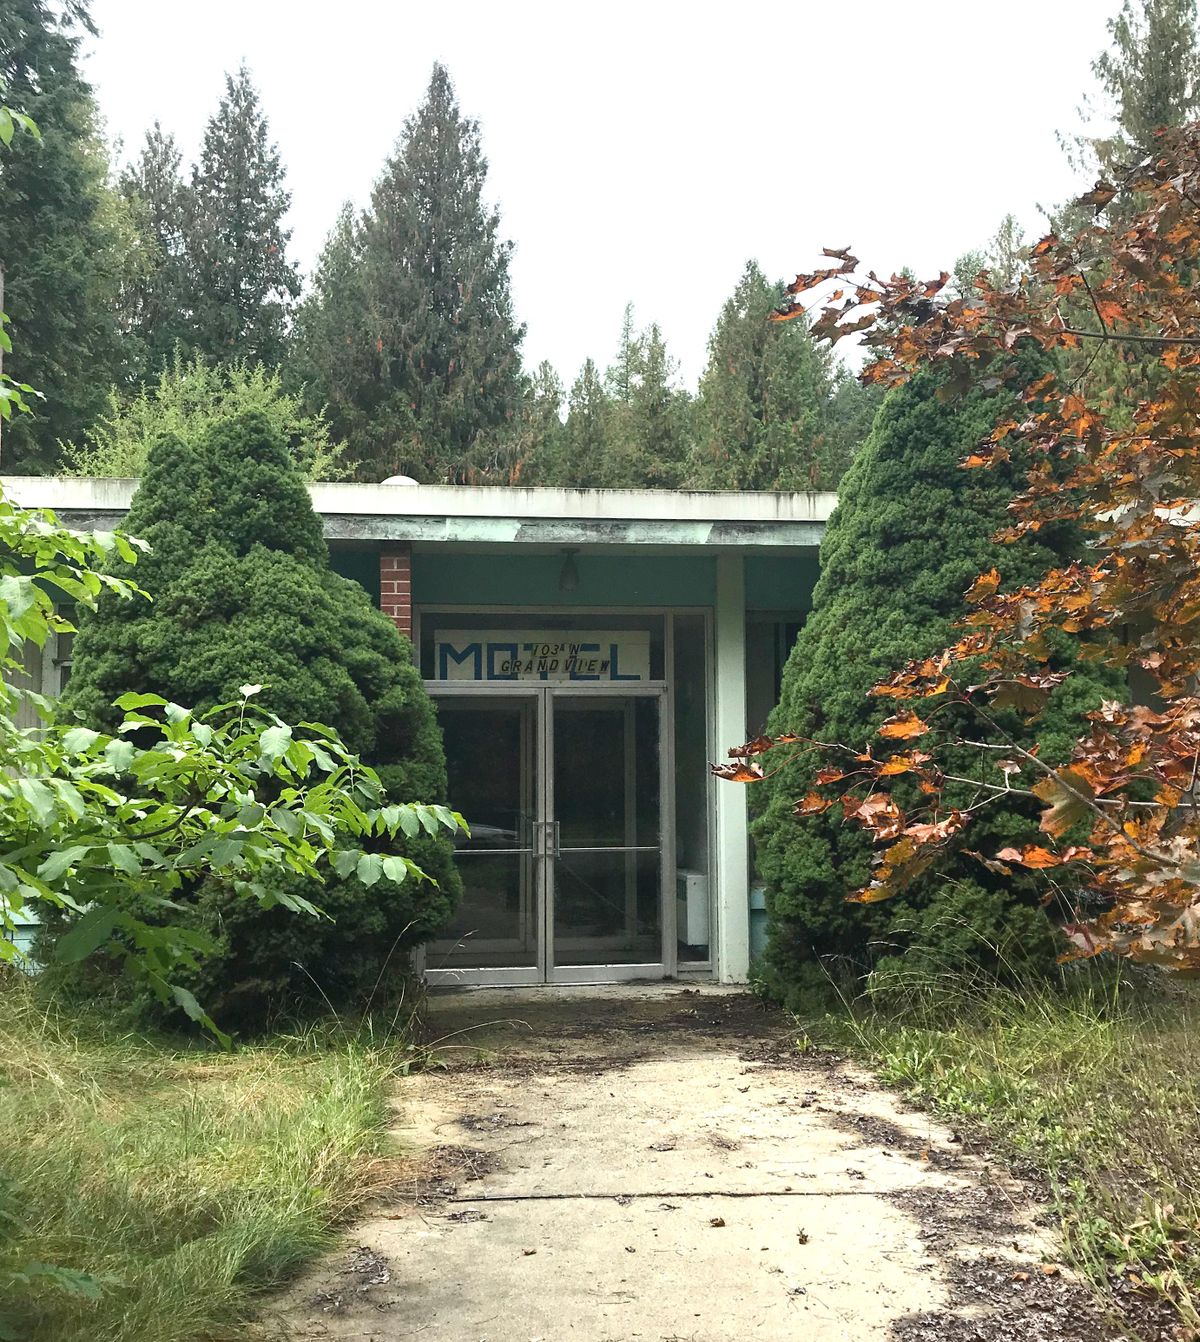 The former Mt. Linton Hospital in Metaline Falls, Washington. After closing in 1988, the building served as a motel. (Arielle Dreher / The Spokesman-Review)